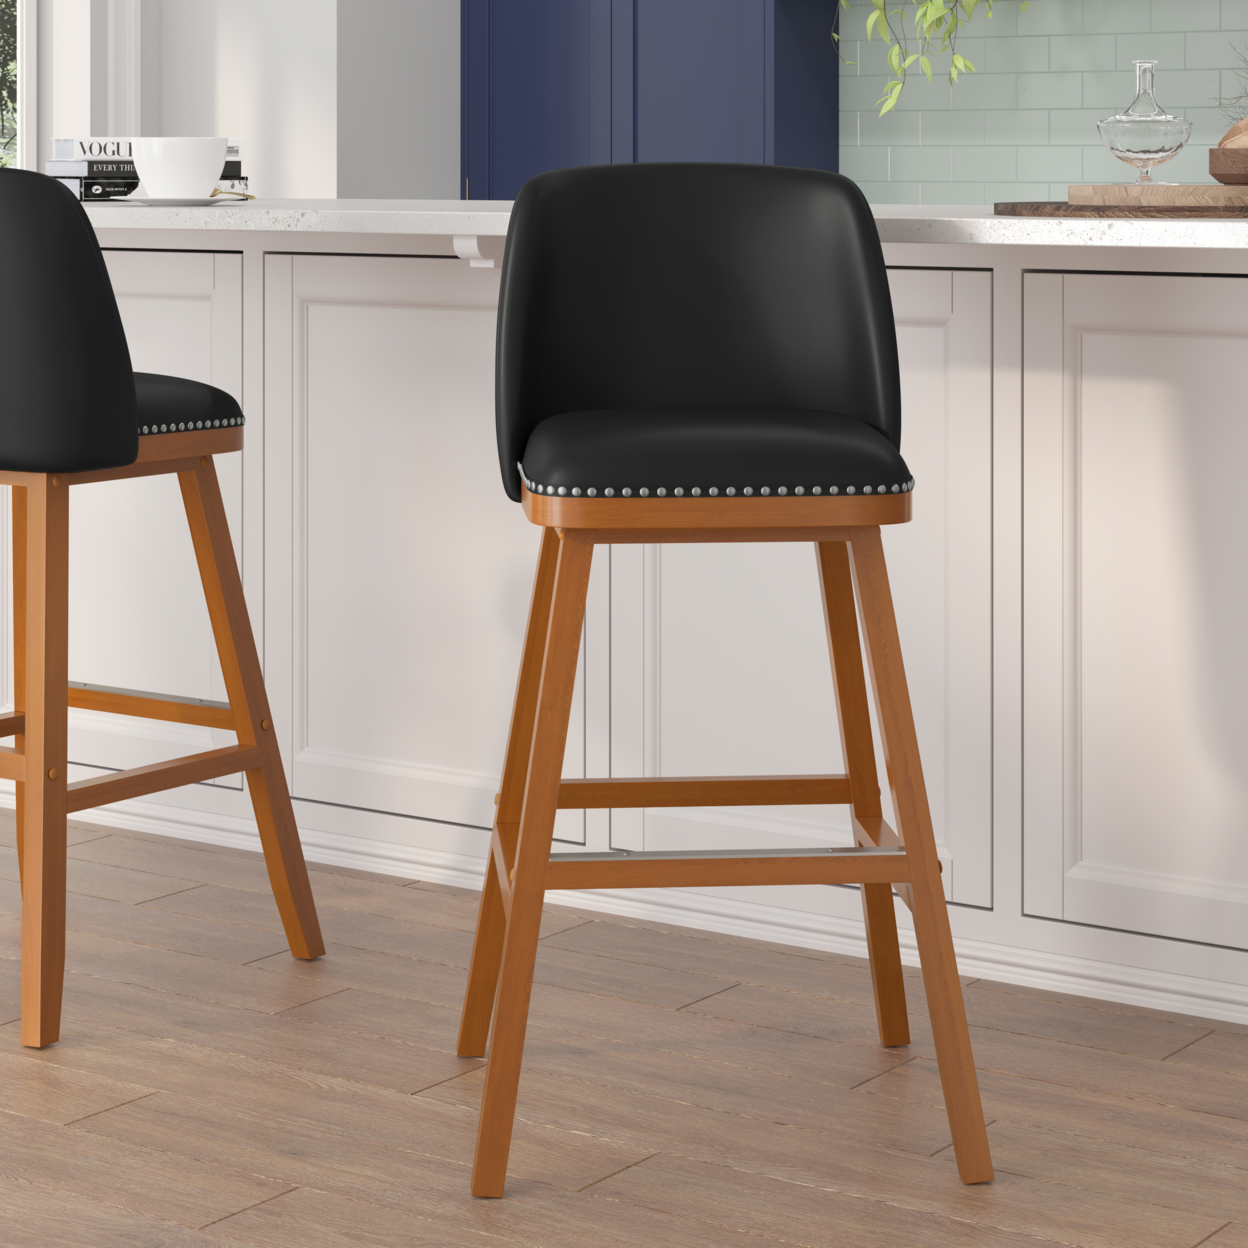 2 Piece 30 Inch Leather Stools, Curved Back, Seat, Nailhead Trims, Black